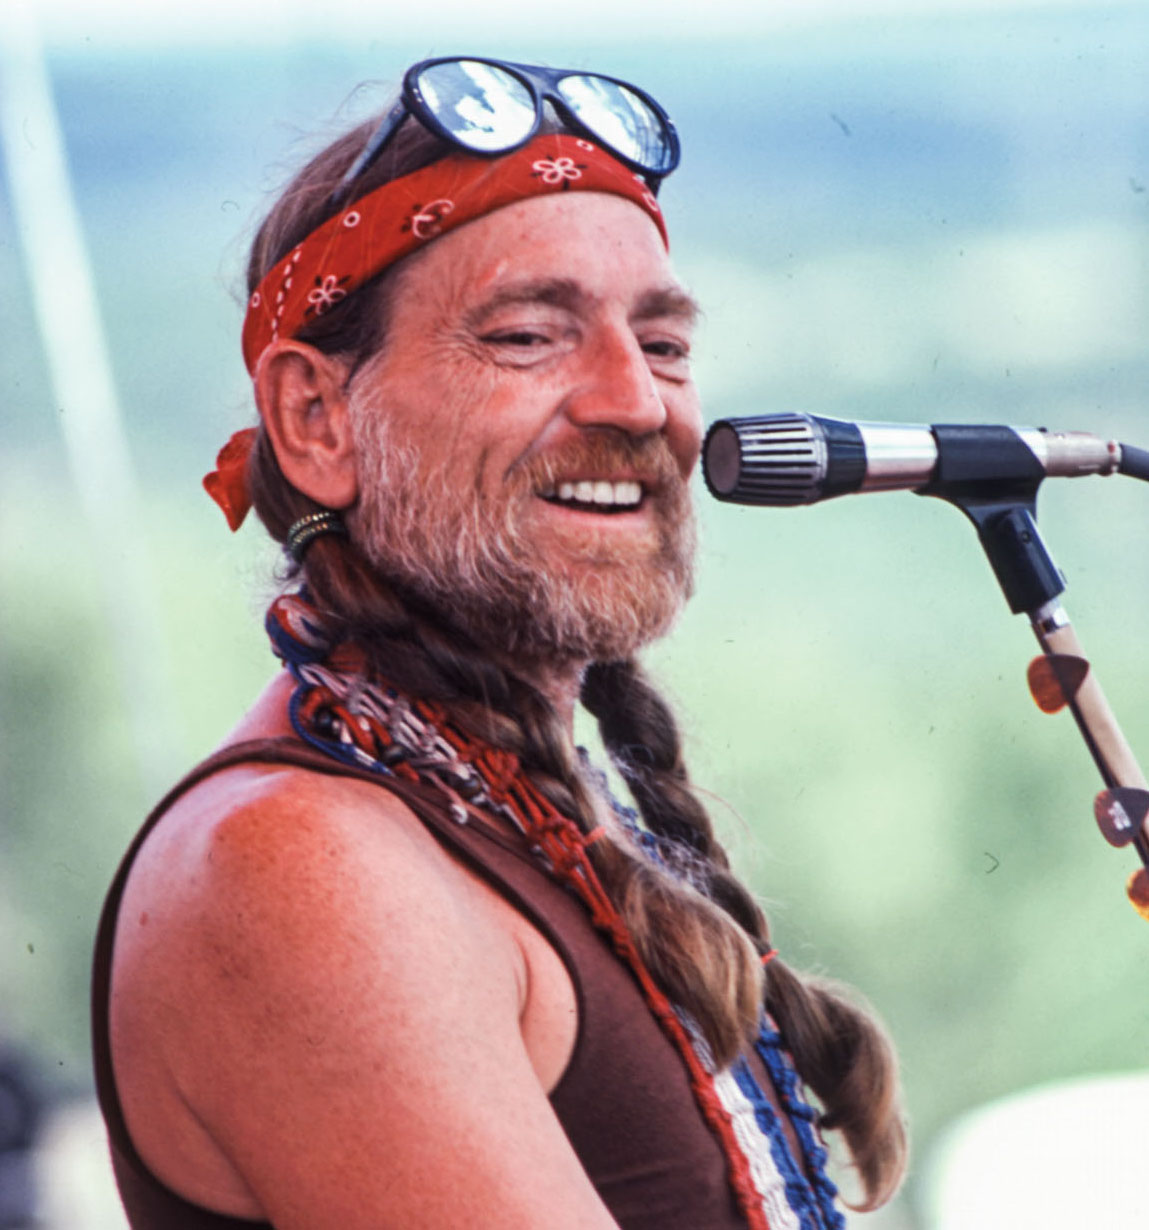 An older man smiling near a microphone while performing.